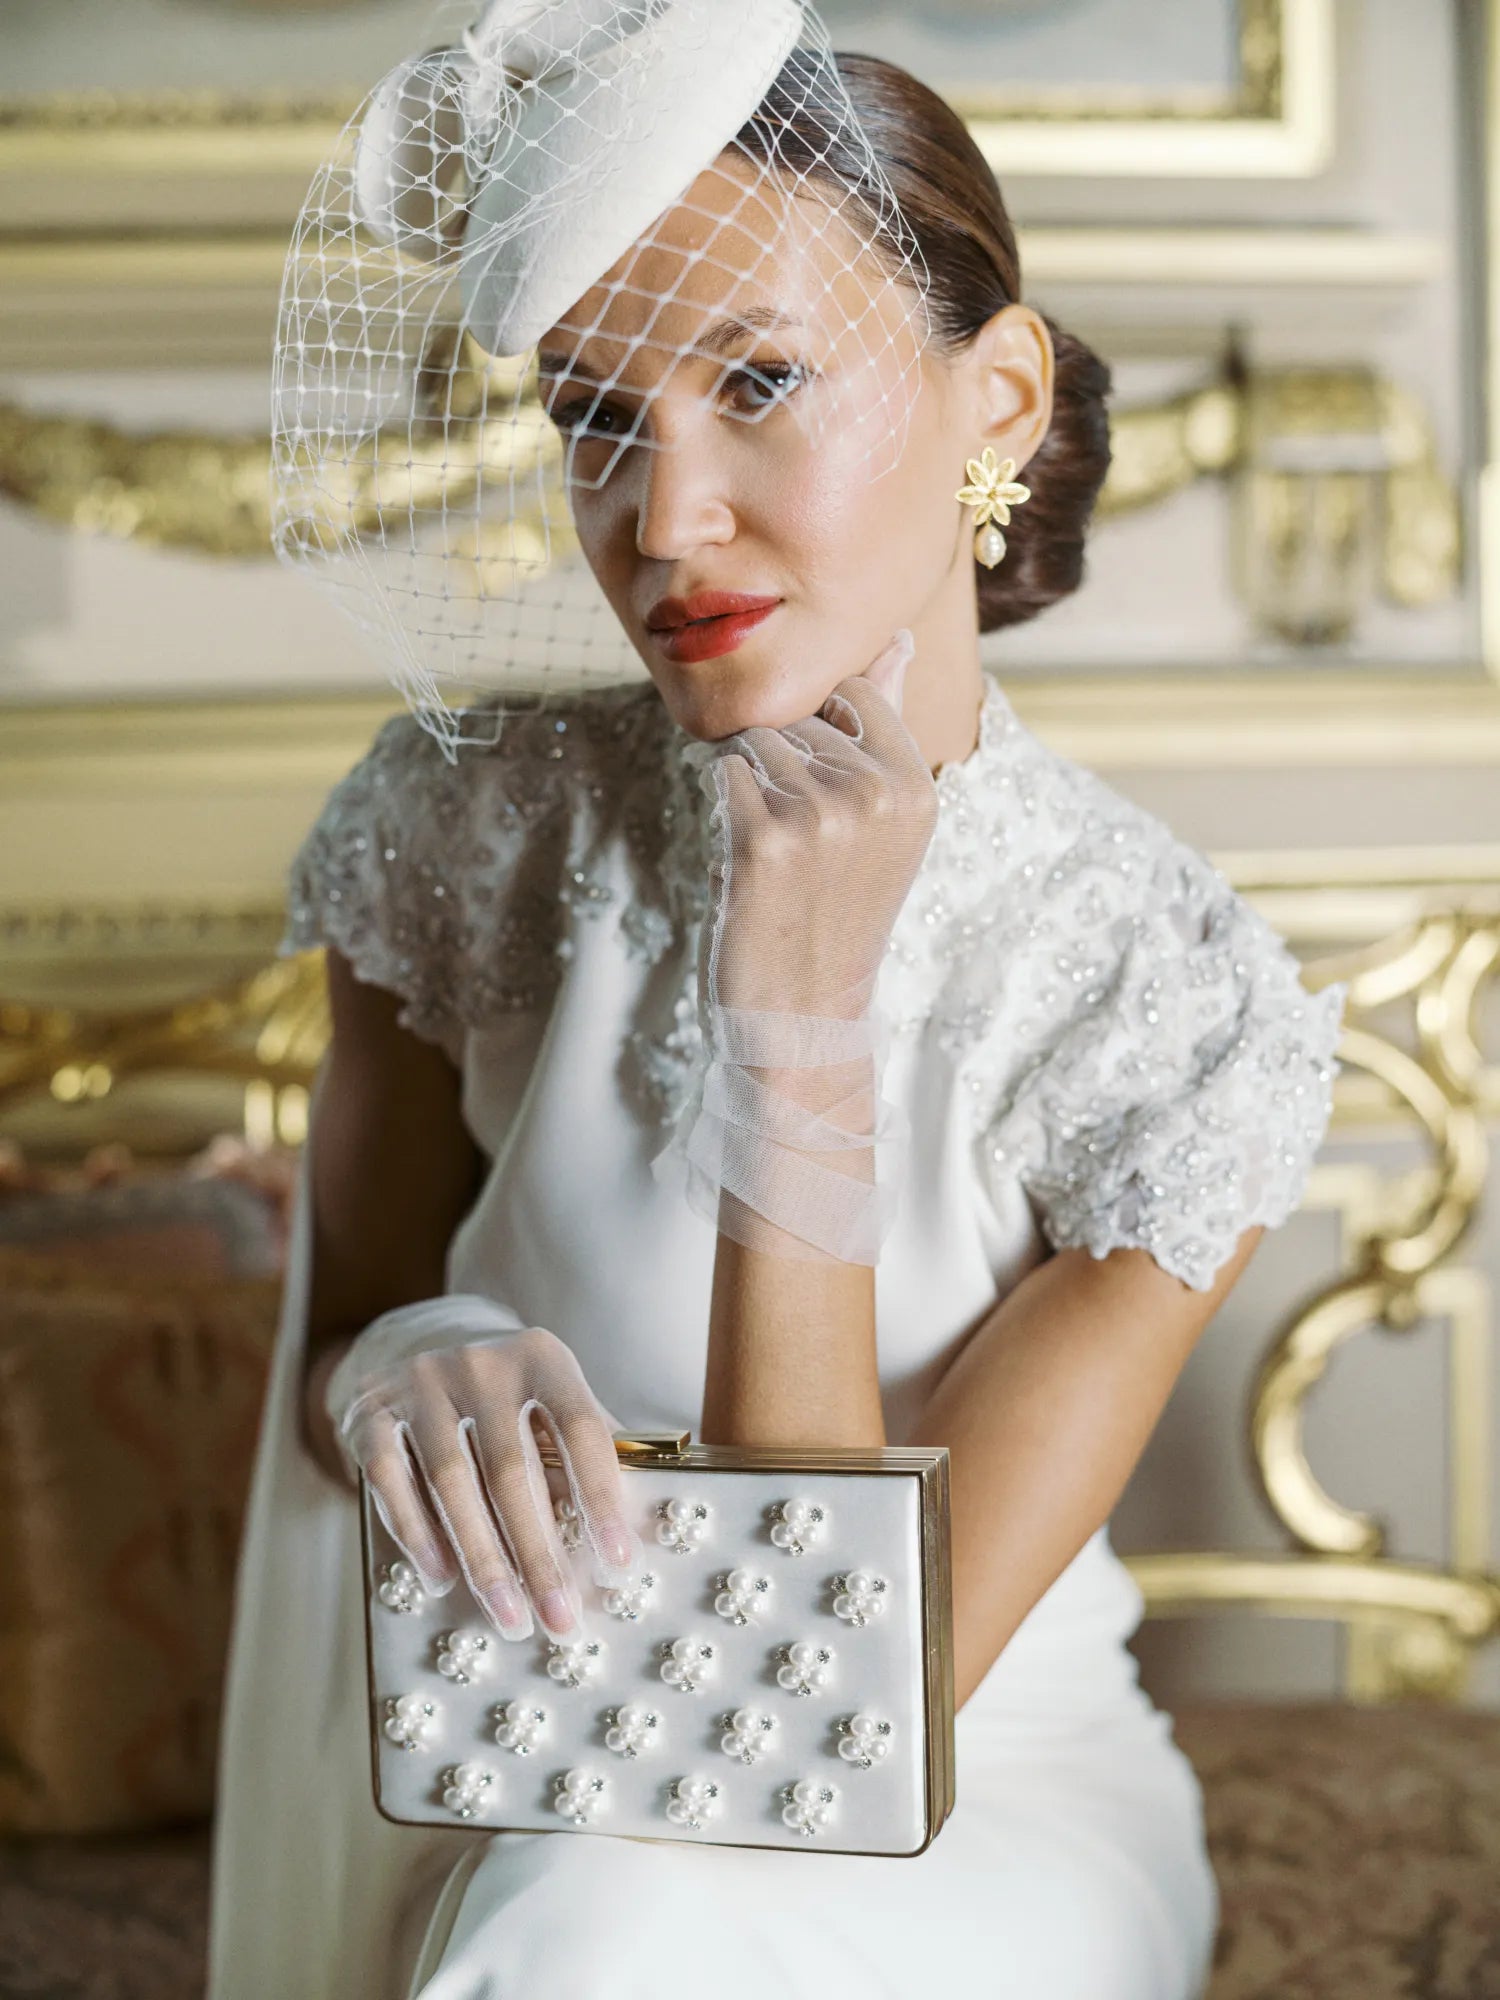 Woman in wedding dress & wedding hat wearing tulle white gloves holding white satin clutch.